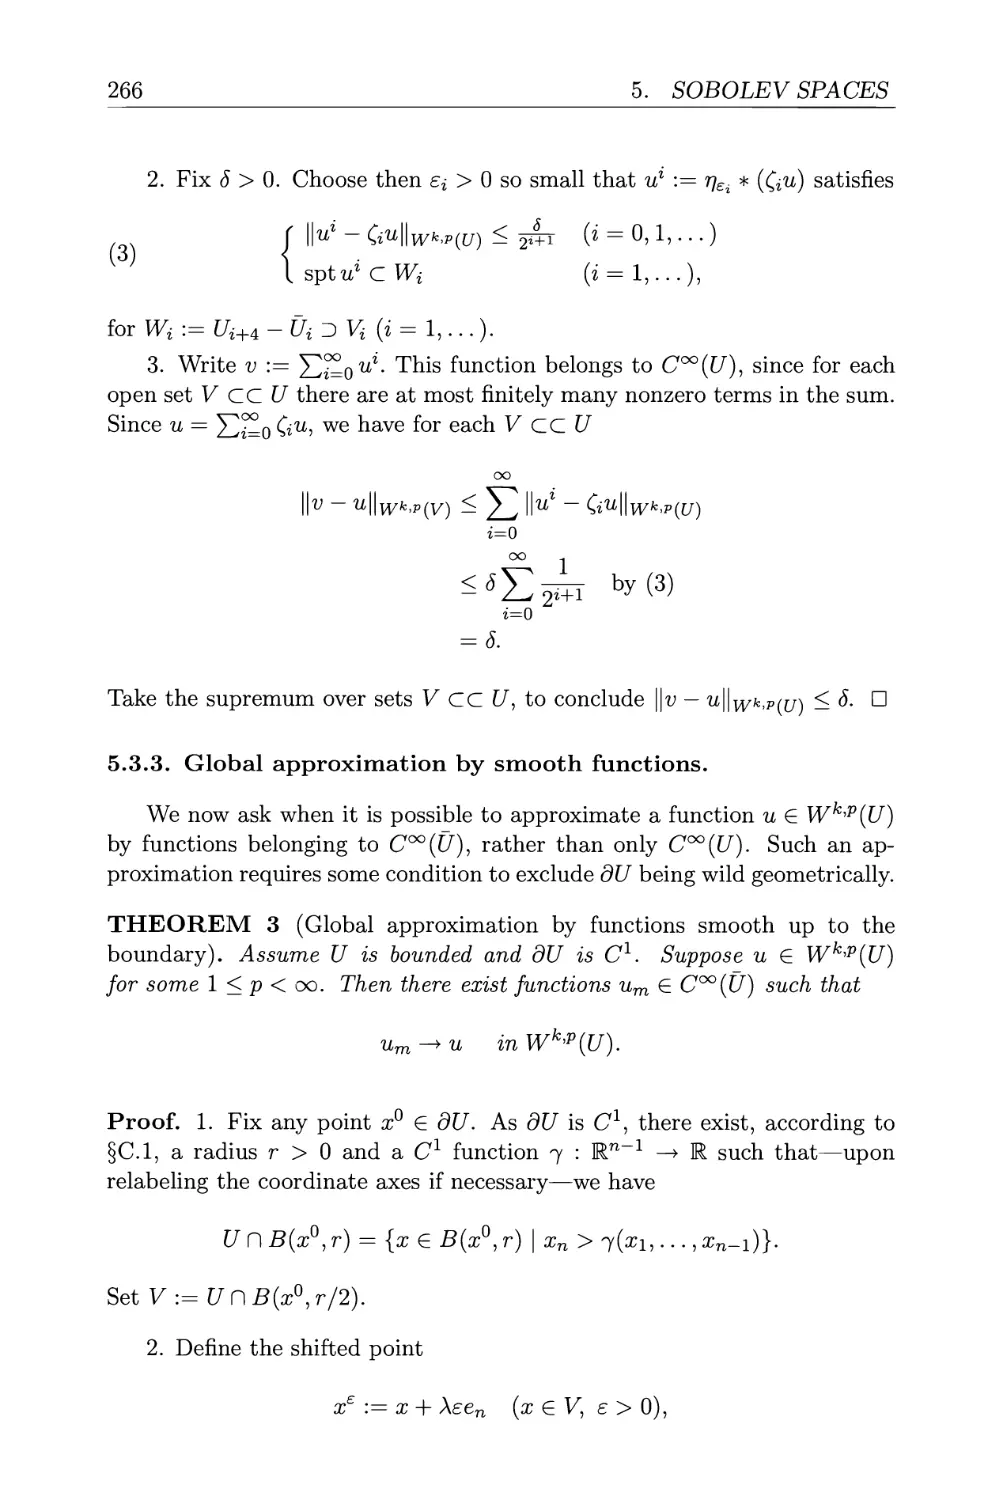 5.3.3. Global approximation by smooth functions